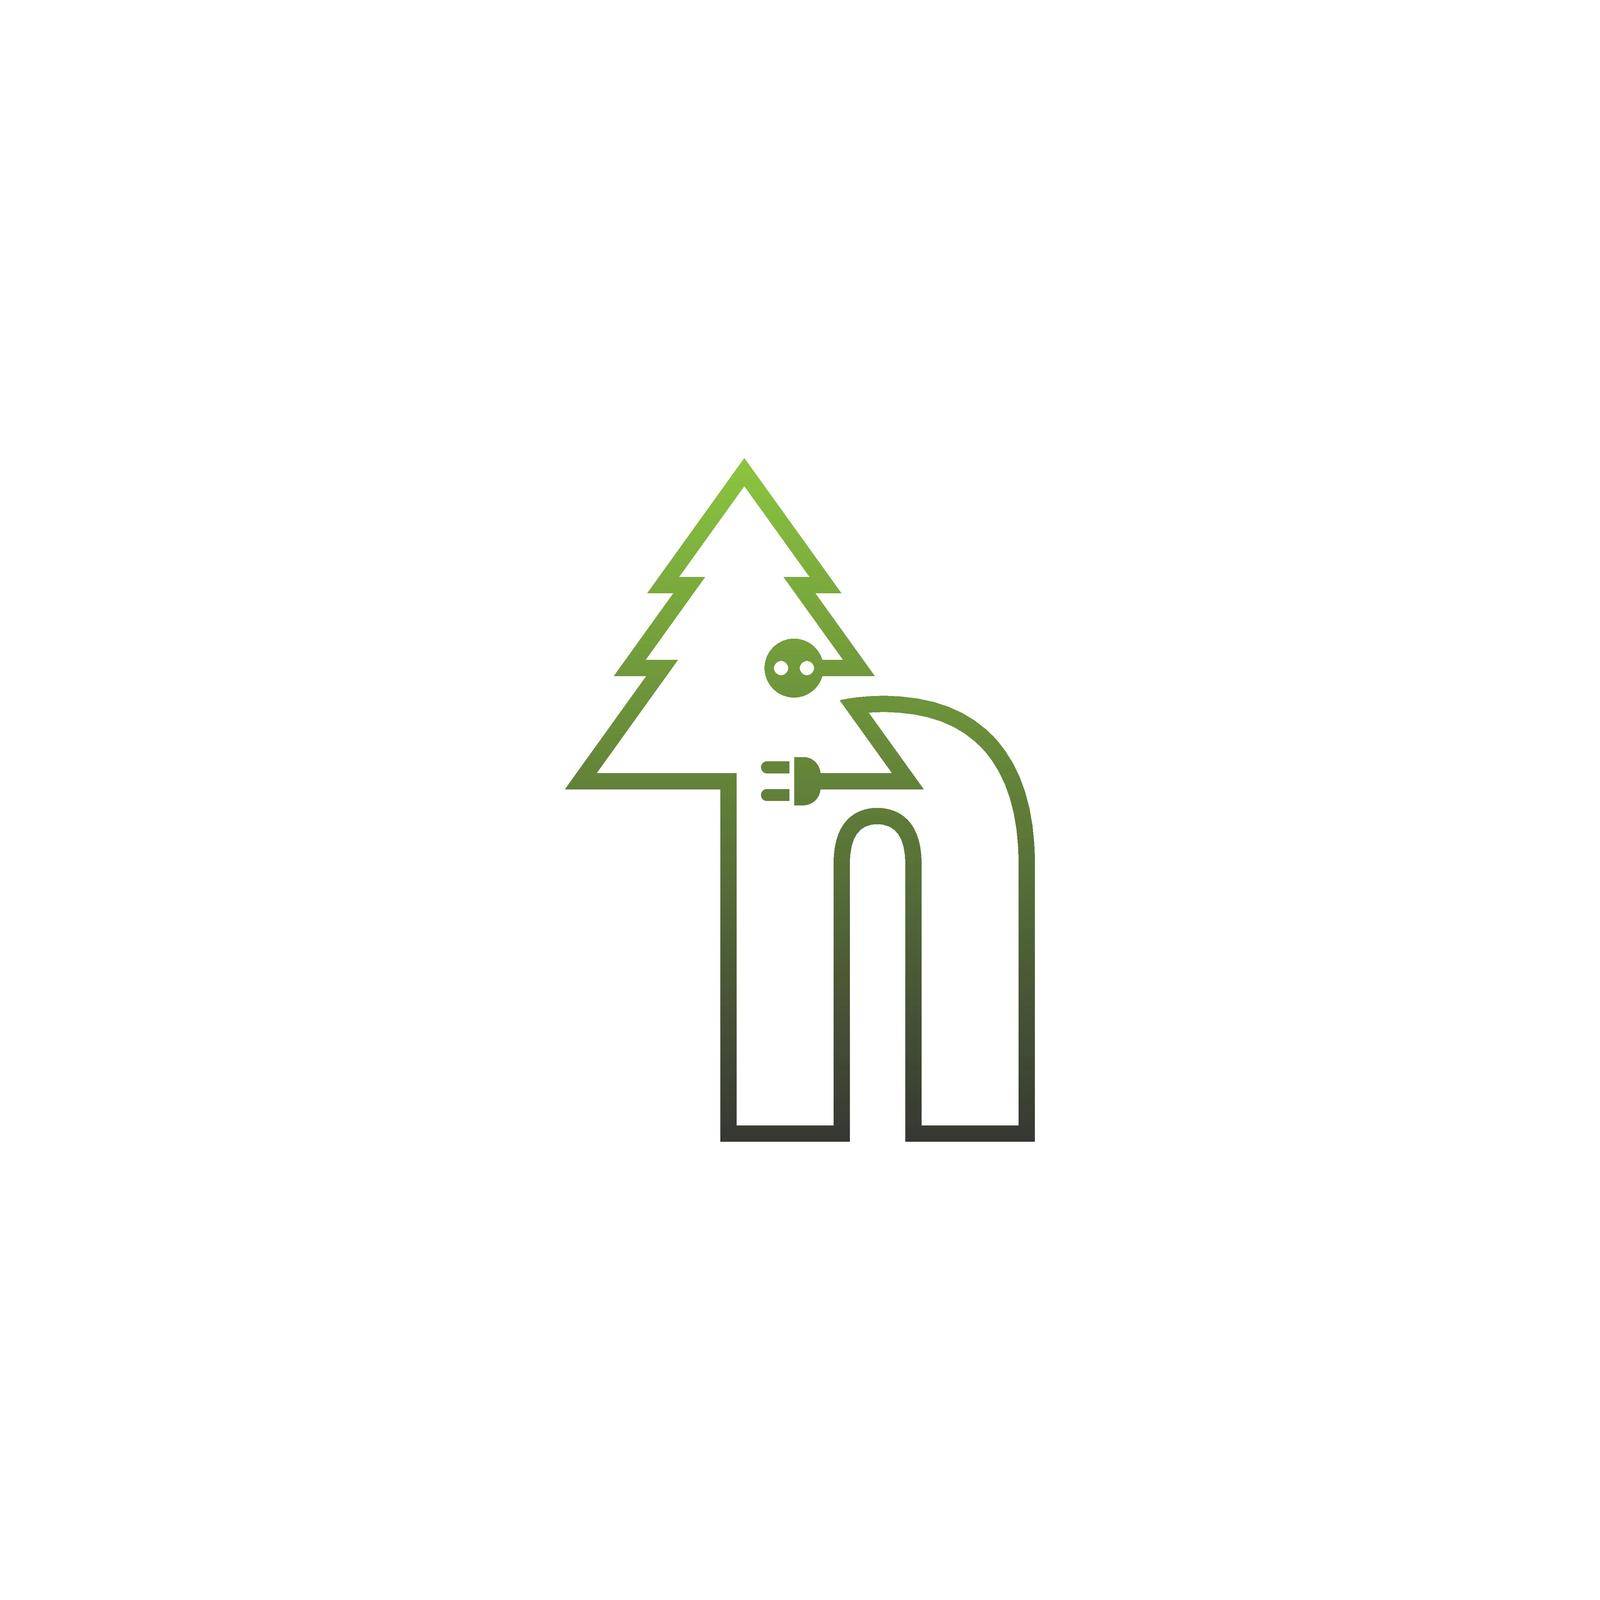 Letter tree Logo, Concept Letter + icon tree